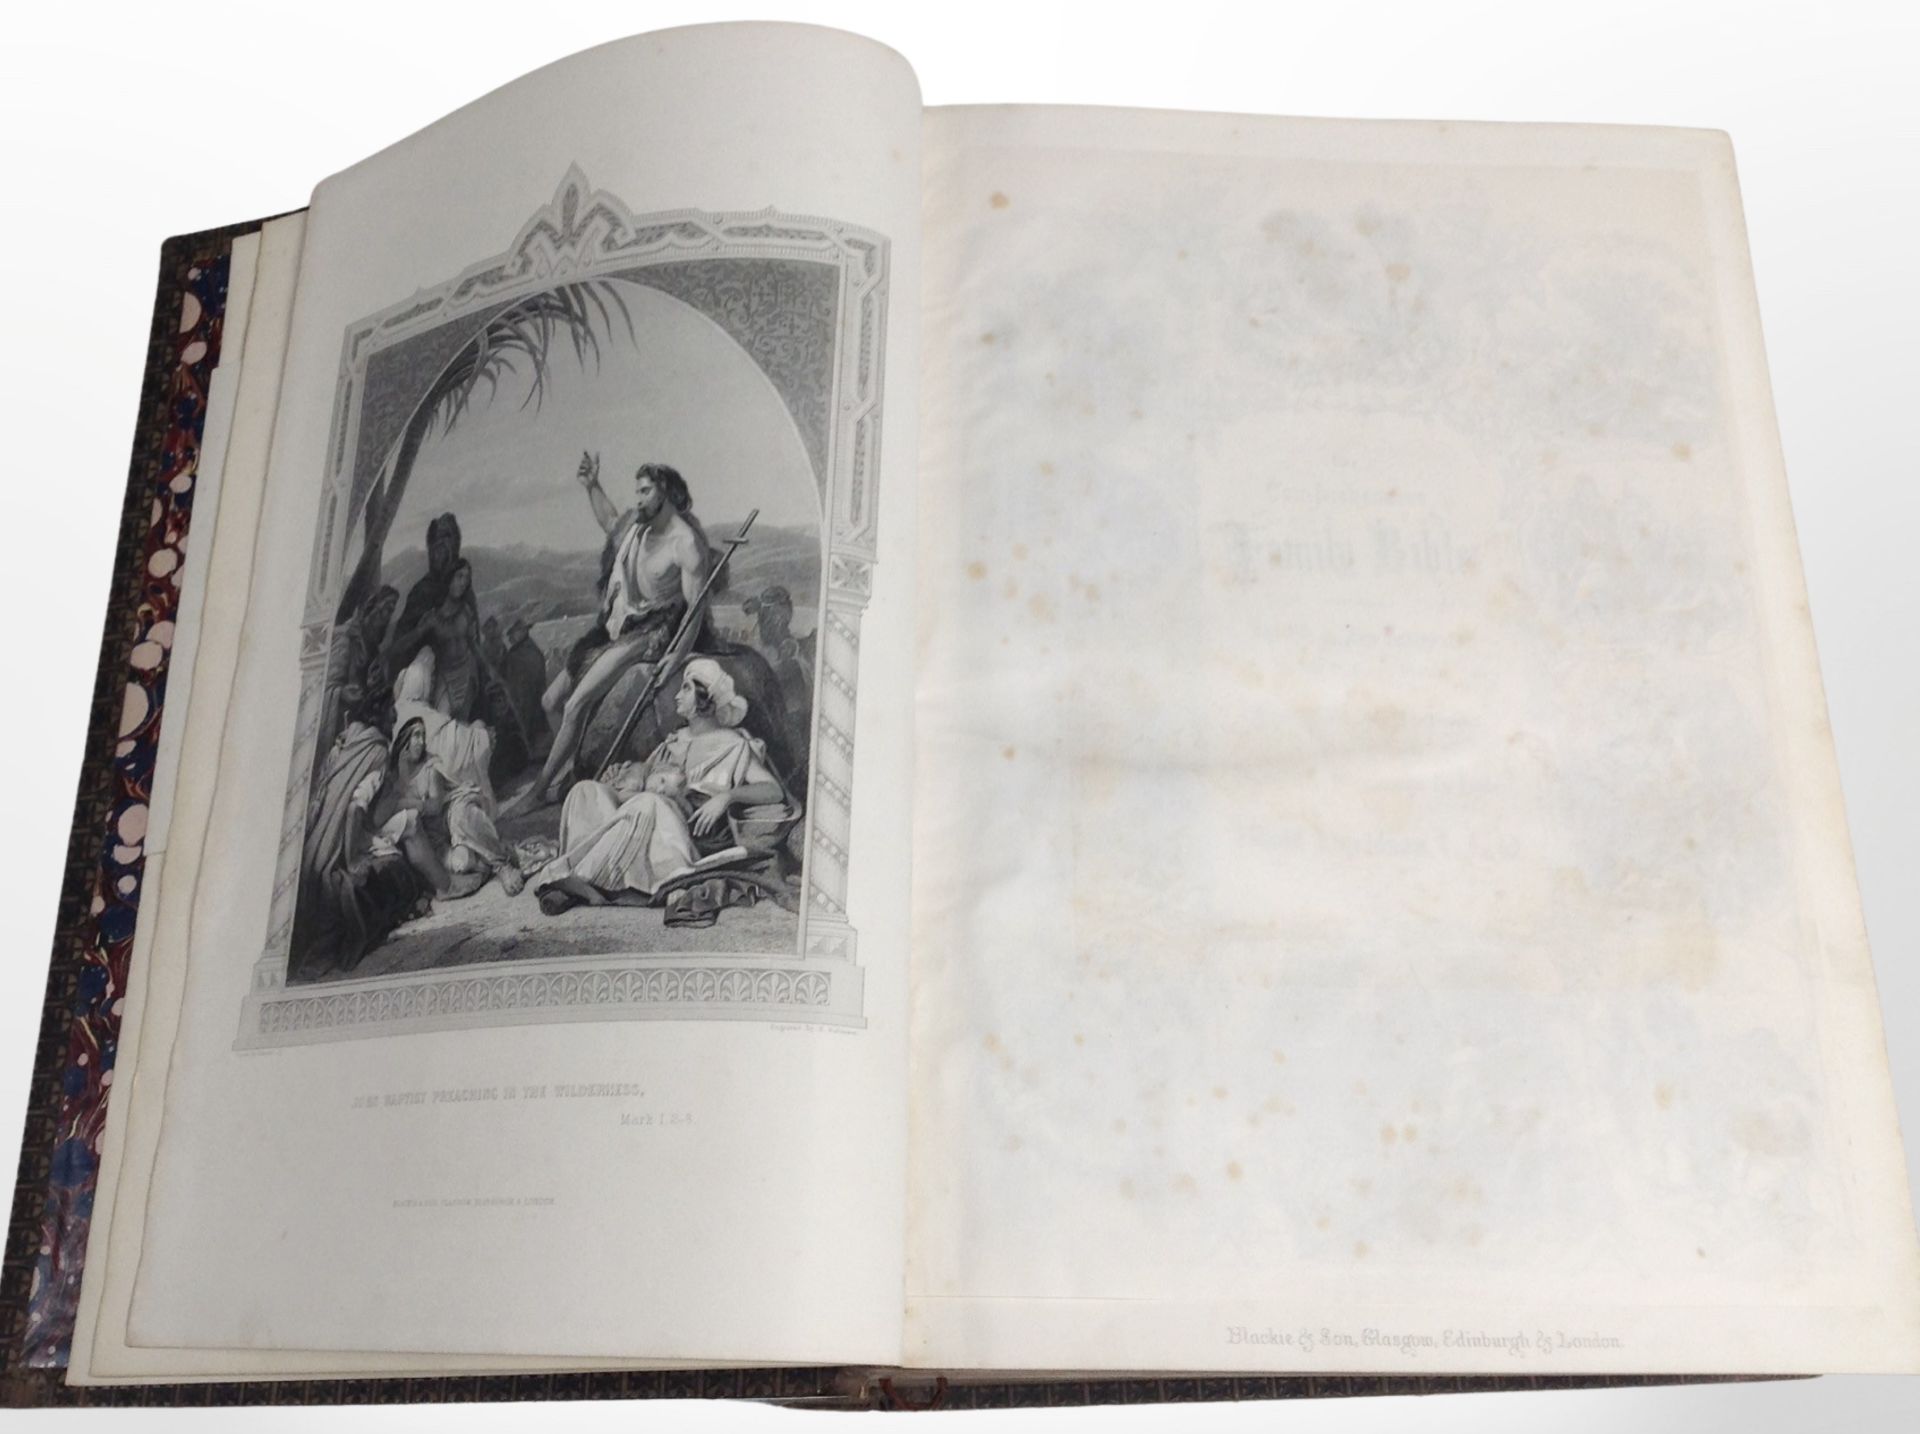 A Victorian leather-bound comprehensive family Bible containing monochrome engraved plates, - Image 2 of 2